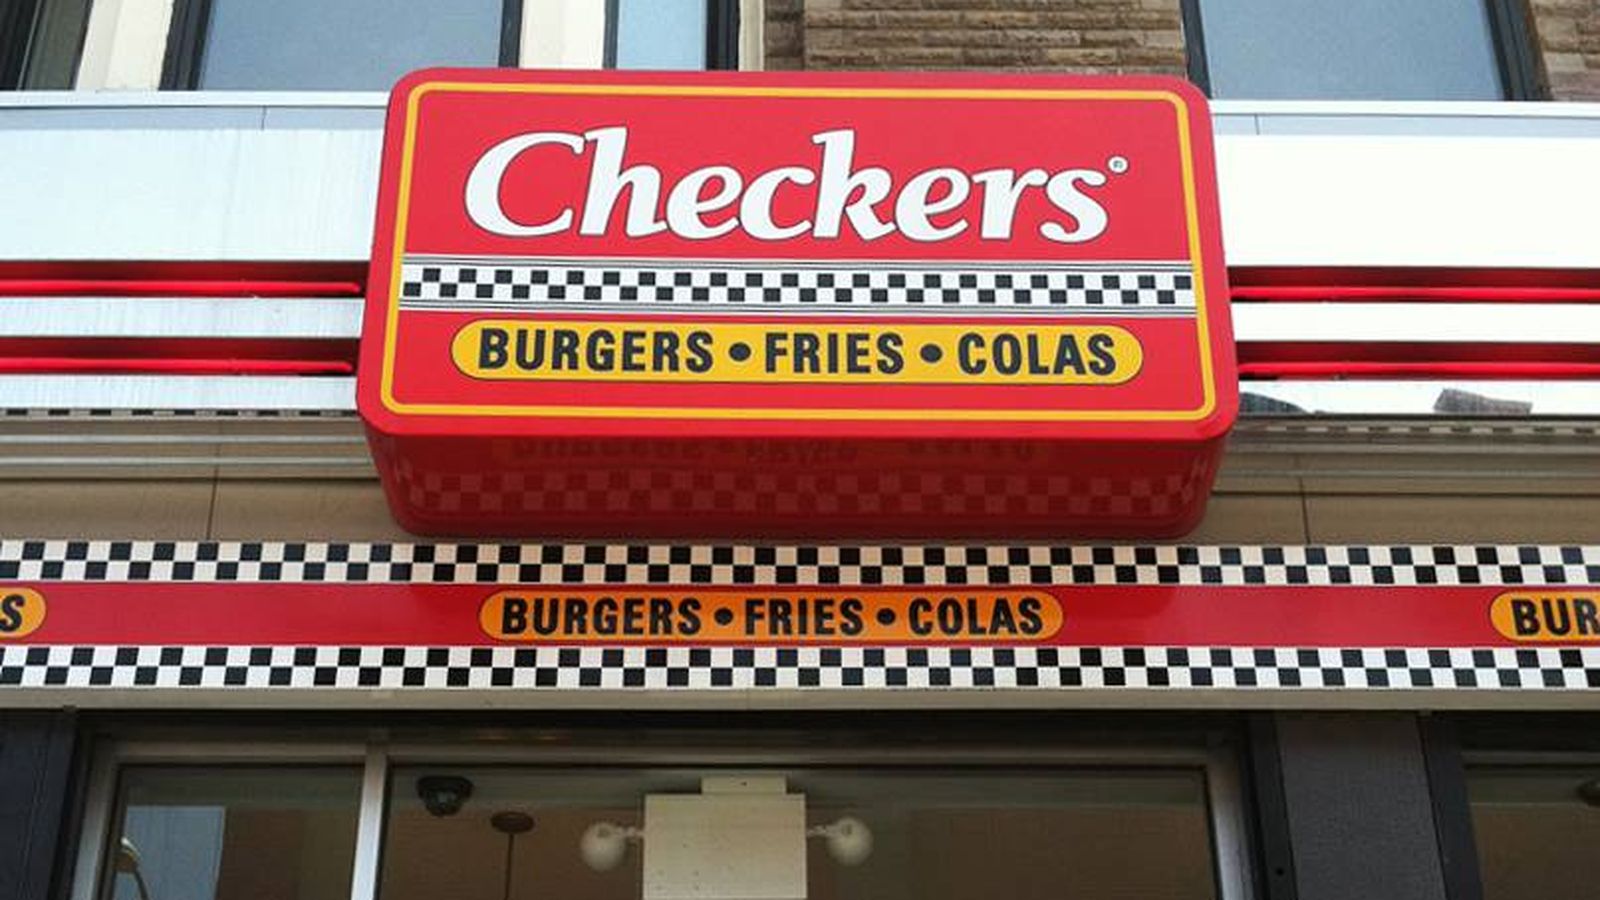 25 - Checkers Storefront.jpg